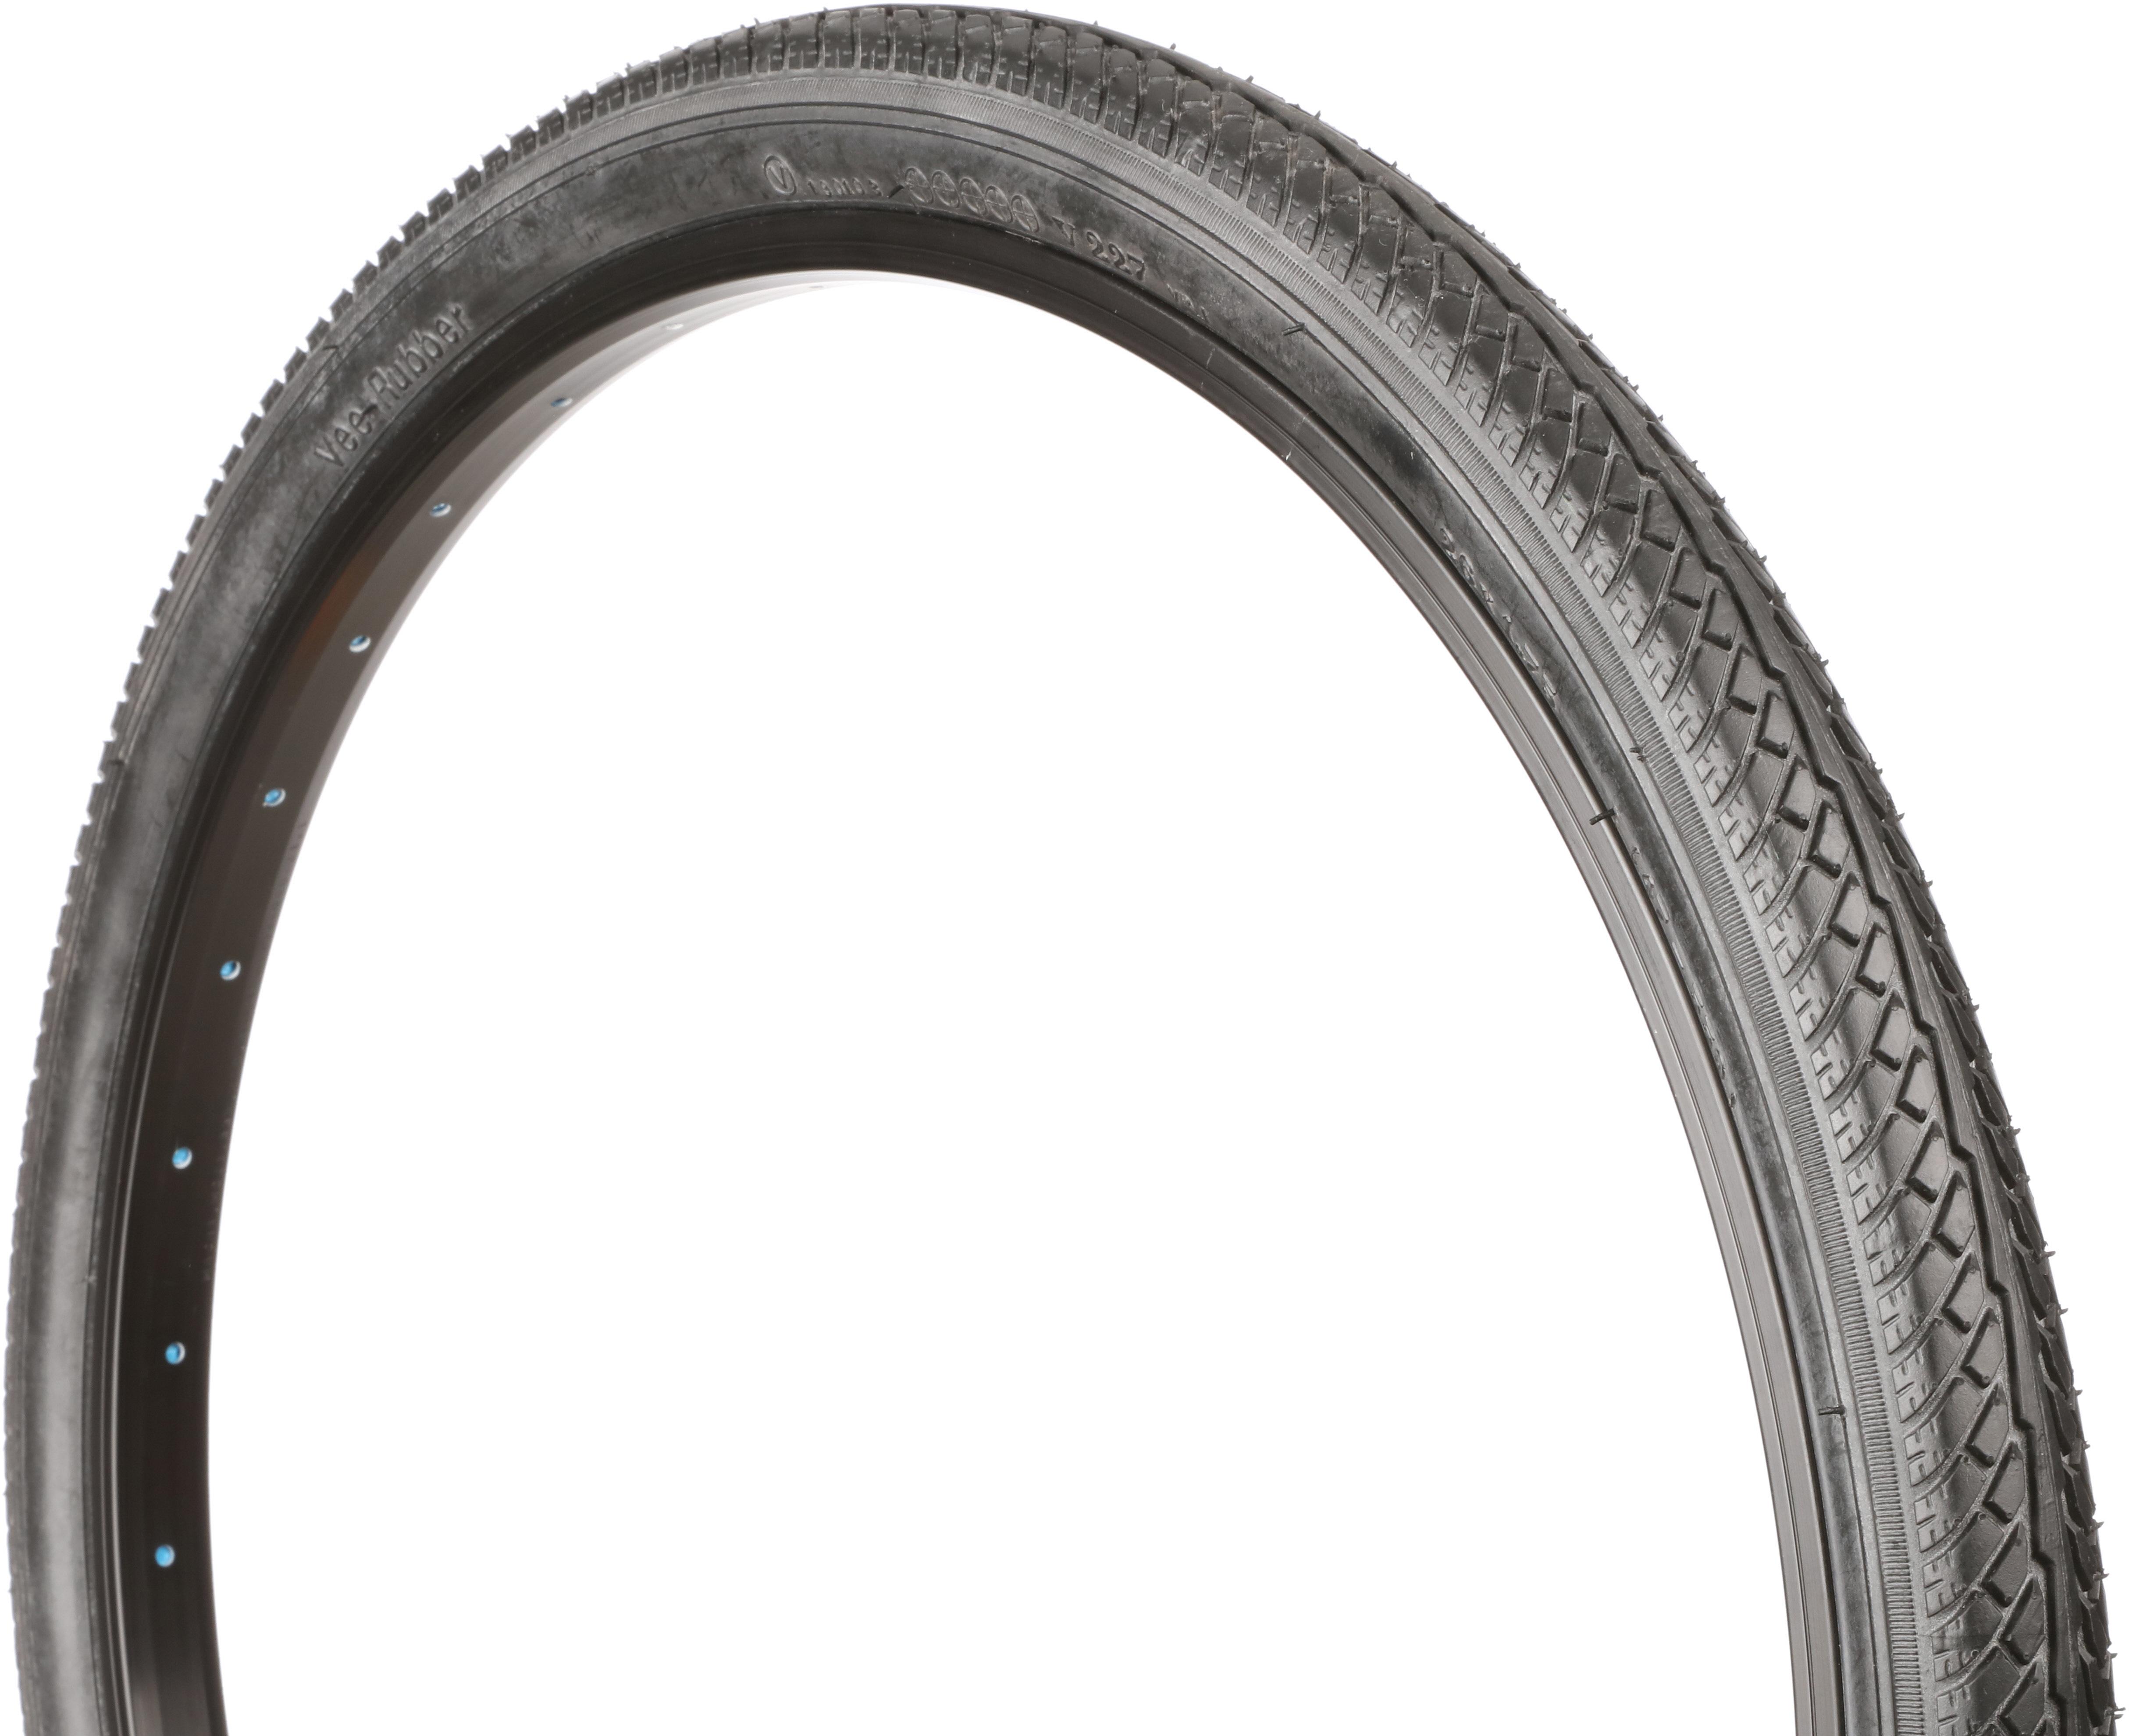 Halfords Hybrid Bike Tyre 26 X 1.75 With Puncture Protect